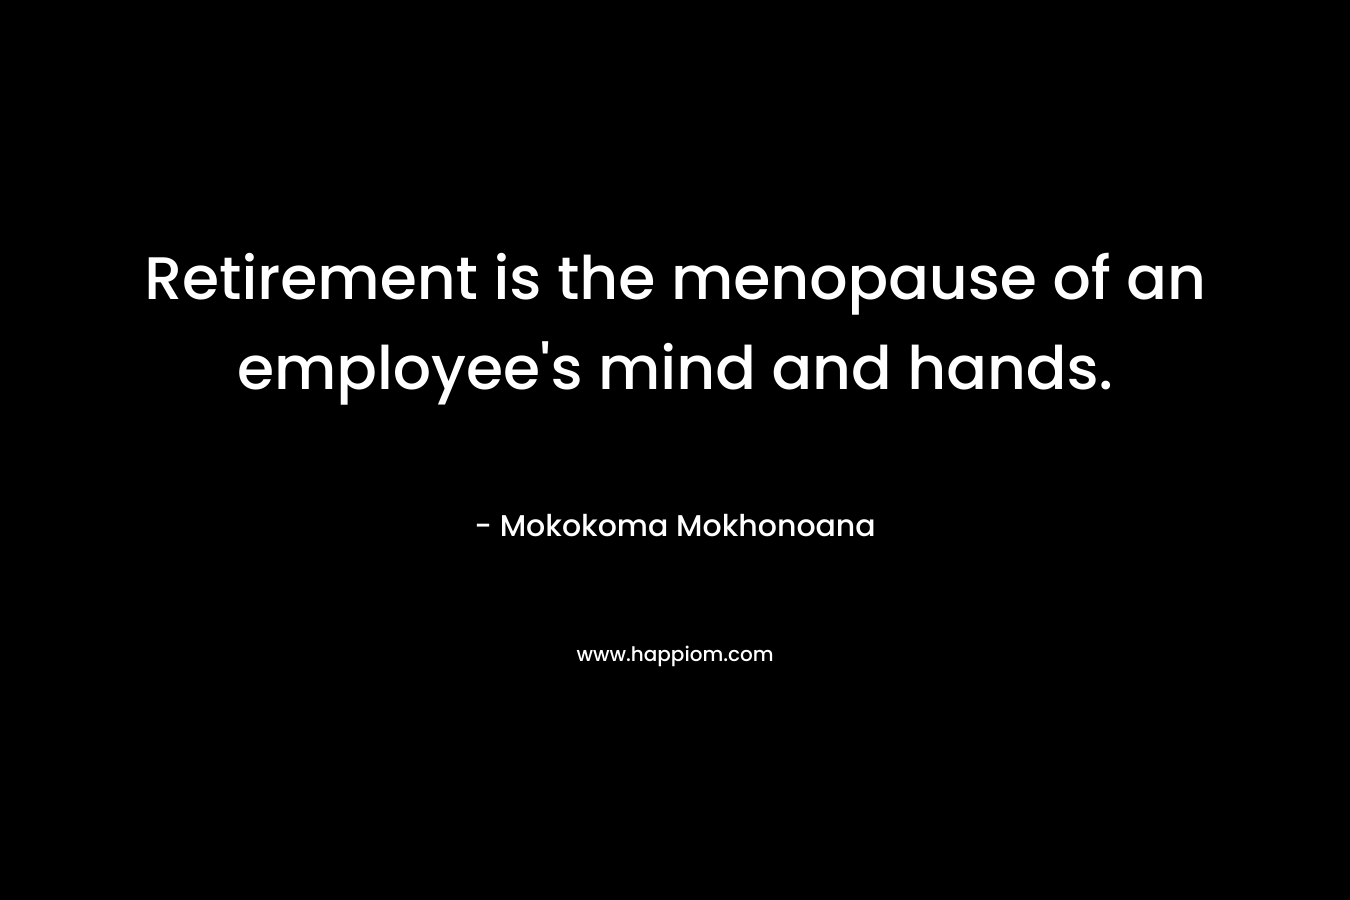 Retirement is the menopause of an employee's mind and hands.